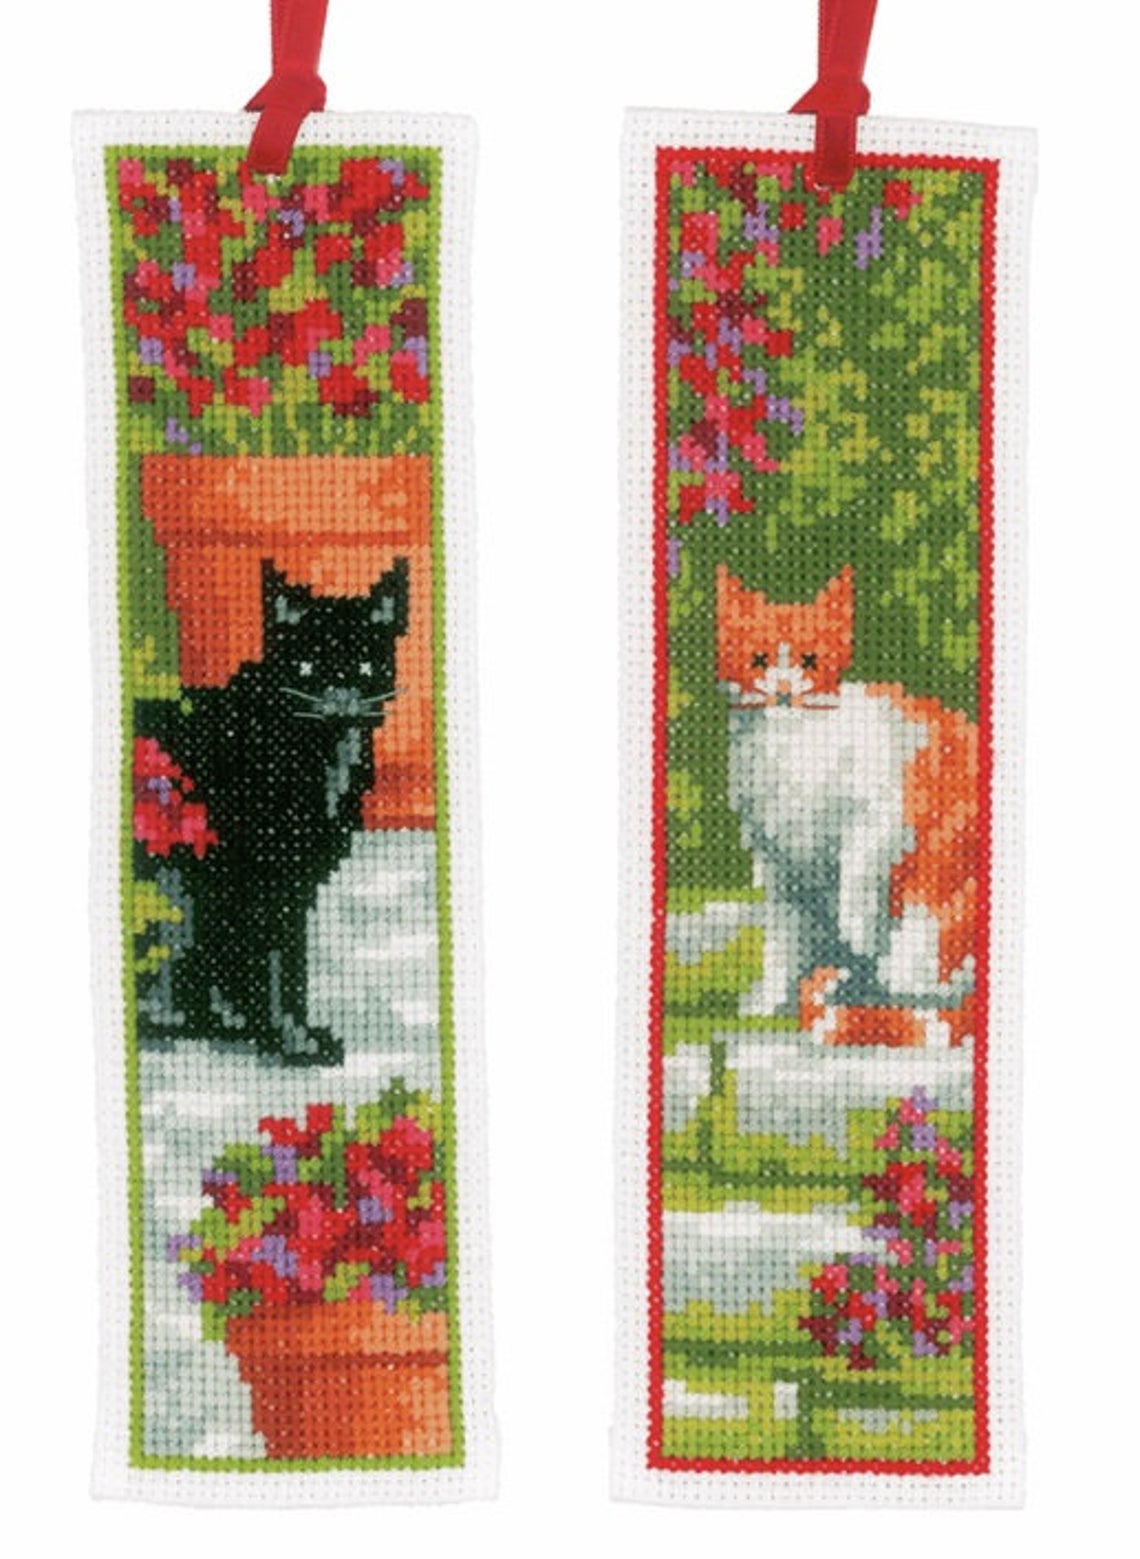 Vervaco Cross Stitch Bookmark Kit Curious Cats Pn-0143915